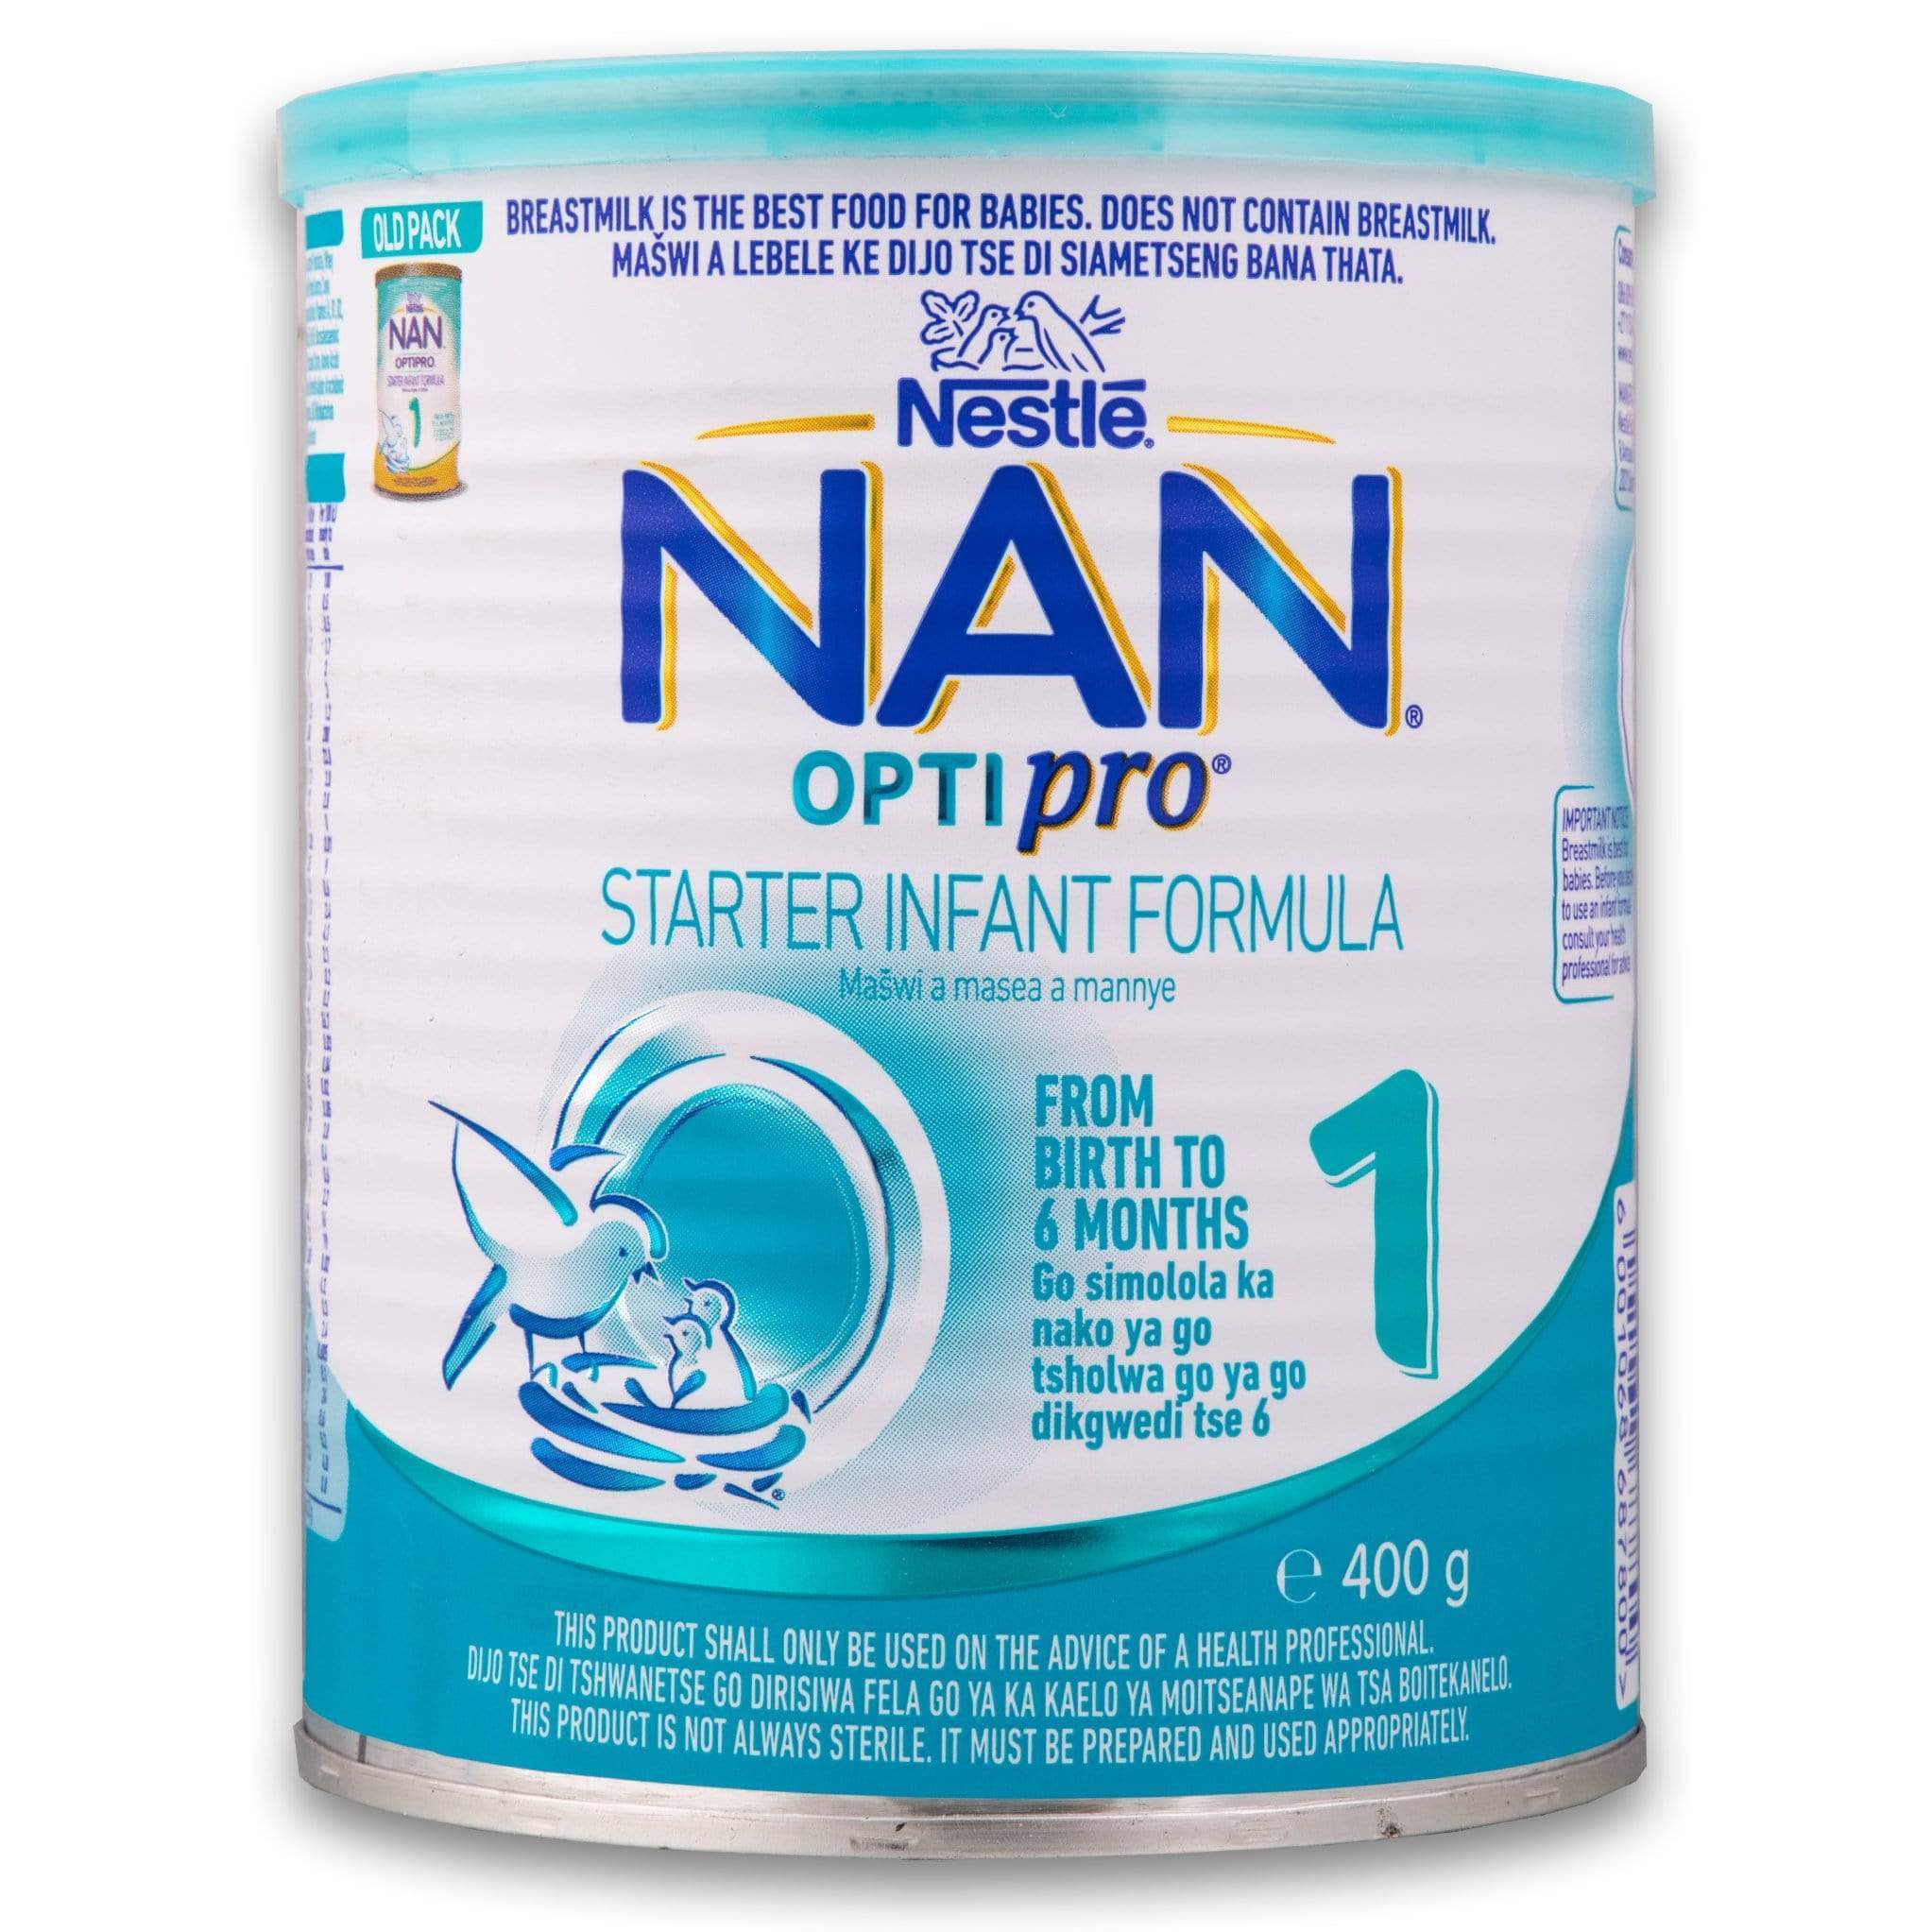 Nan Opti Pro 1 Starter Infant Formula 400g - From Birth to 6 Months